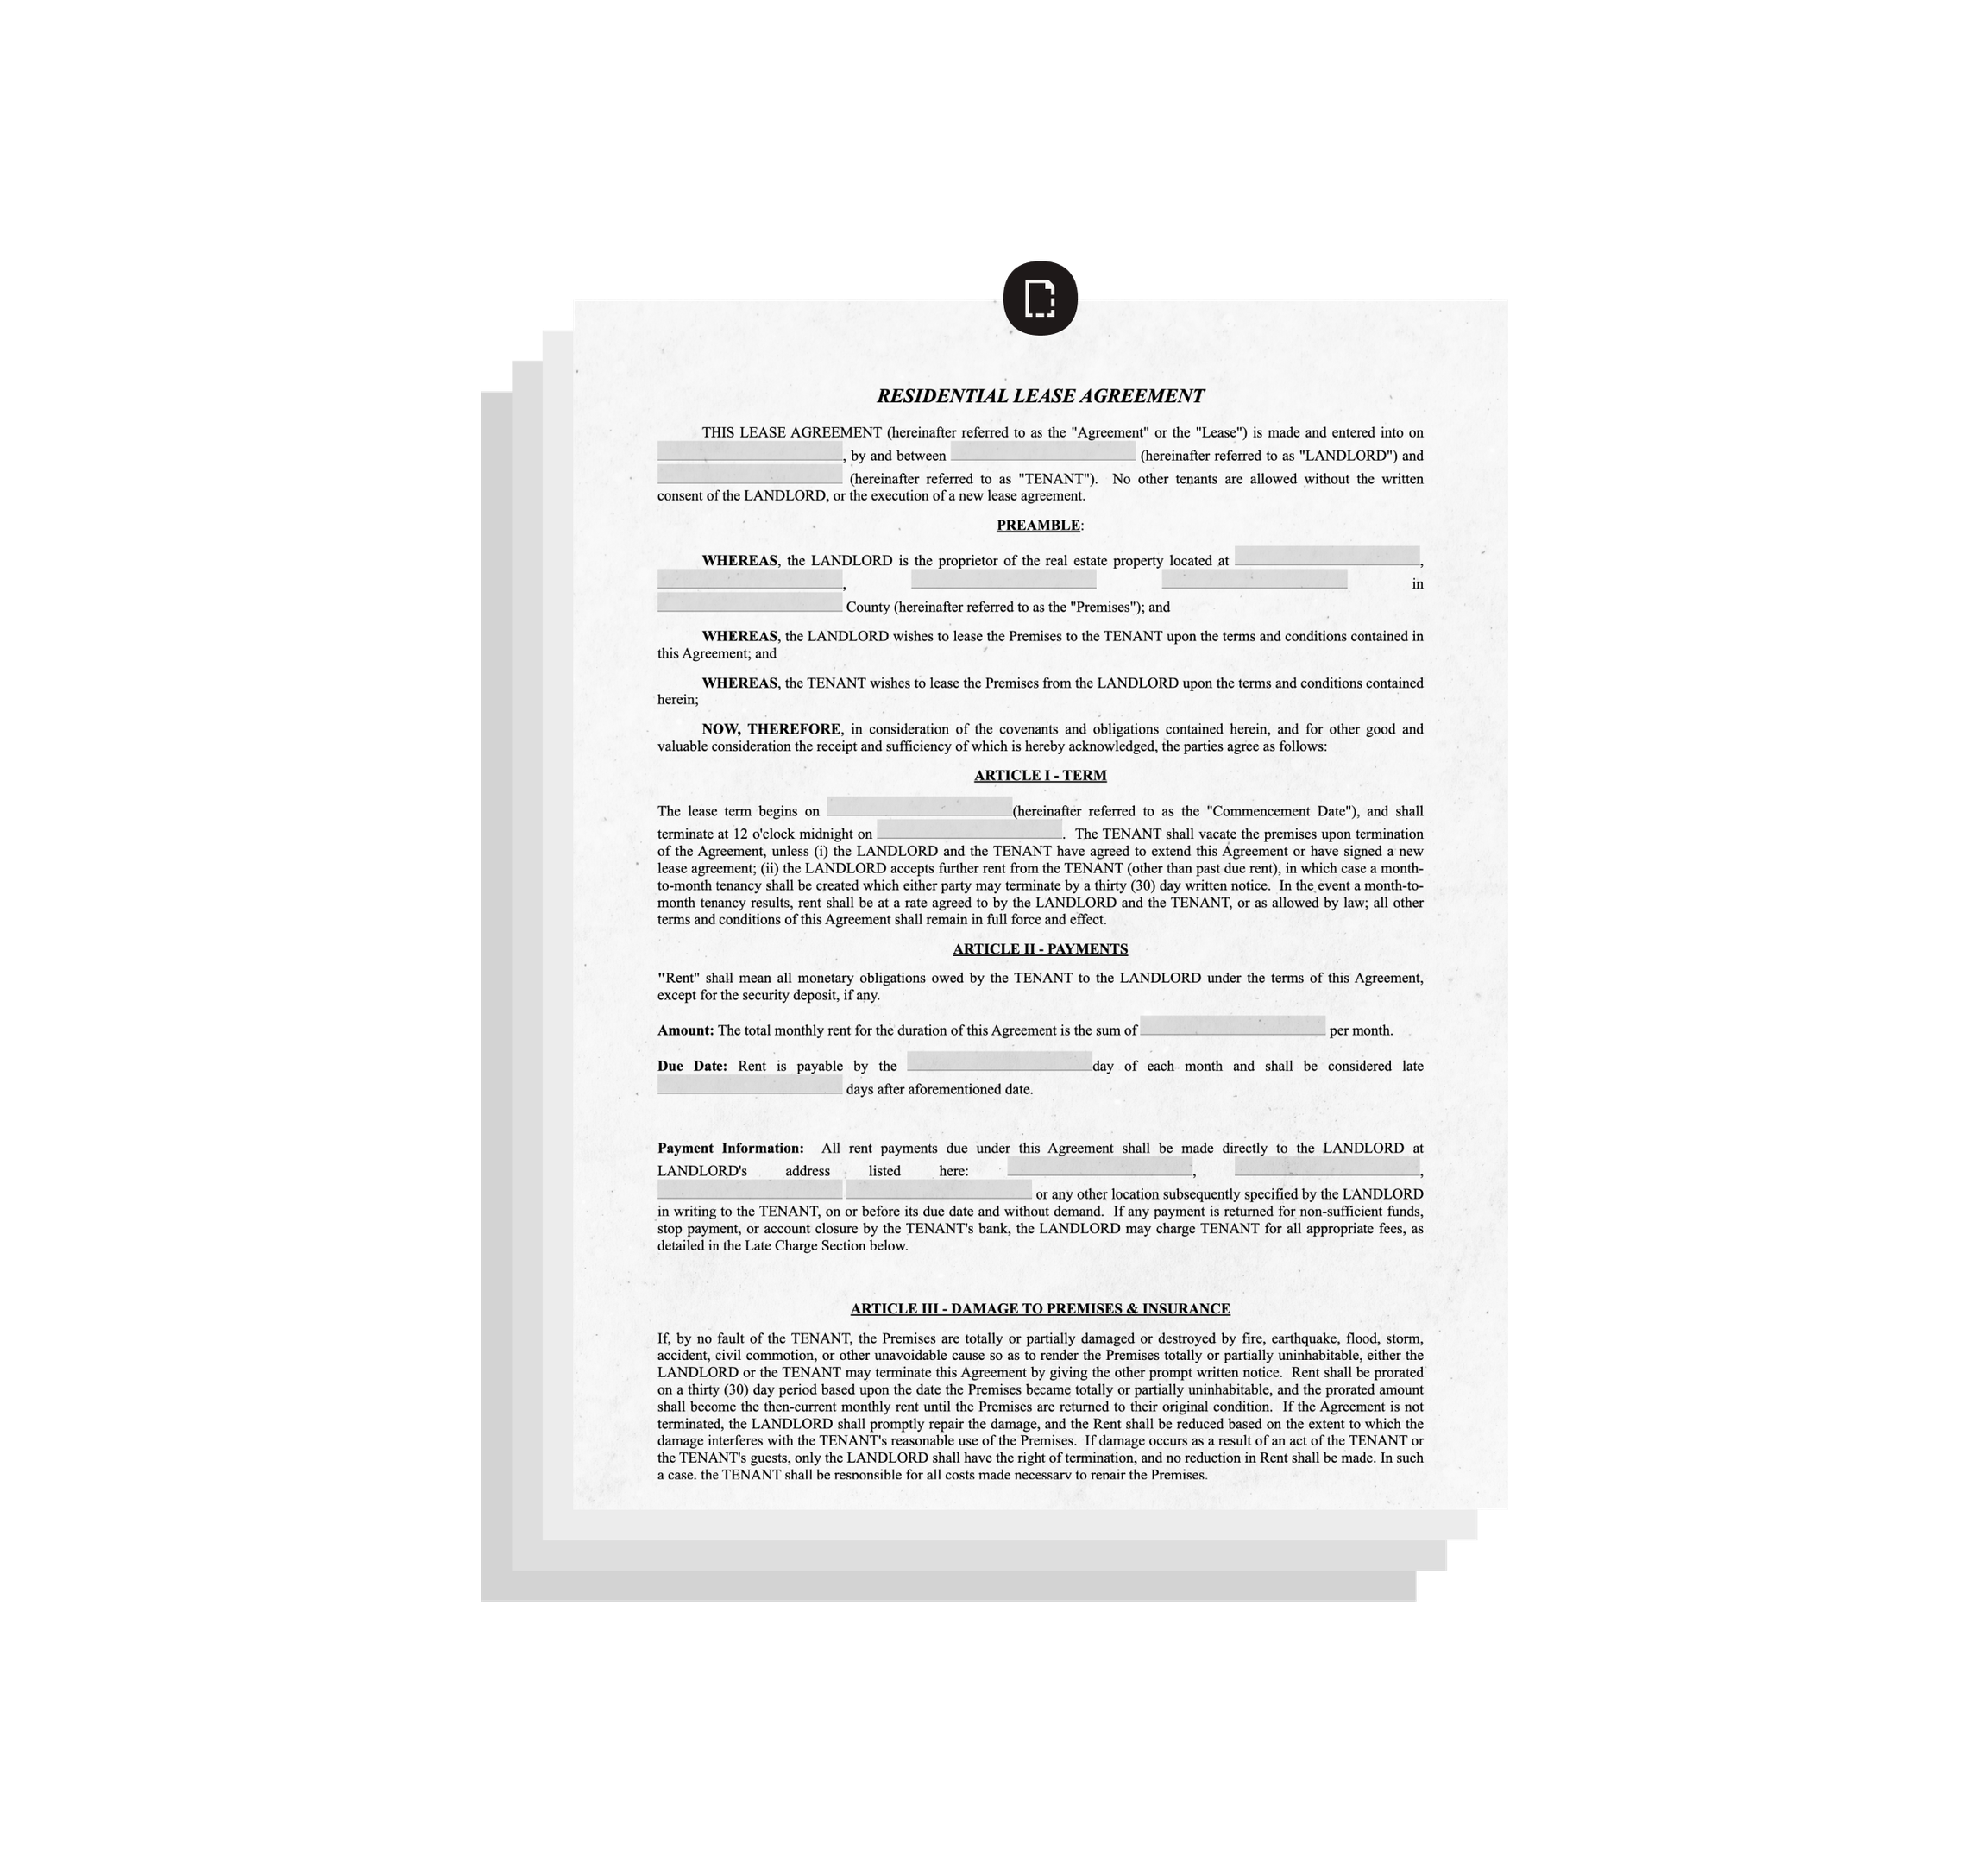 An example of a residential lease agreement.